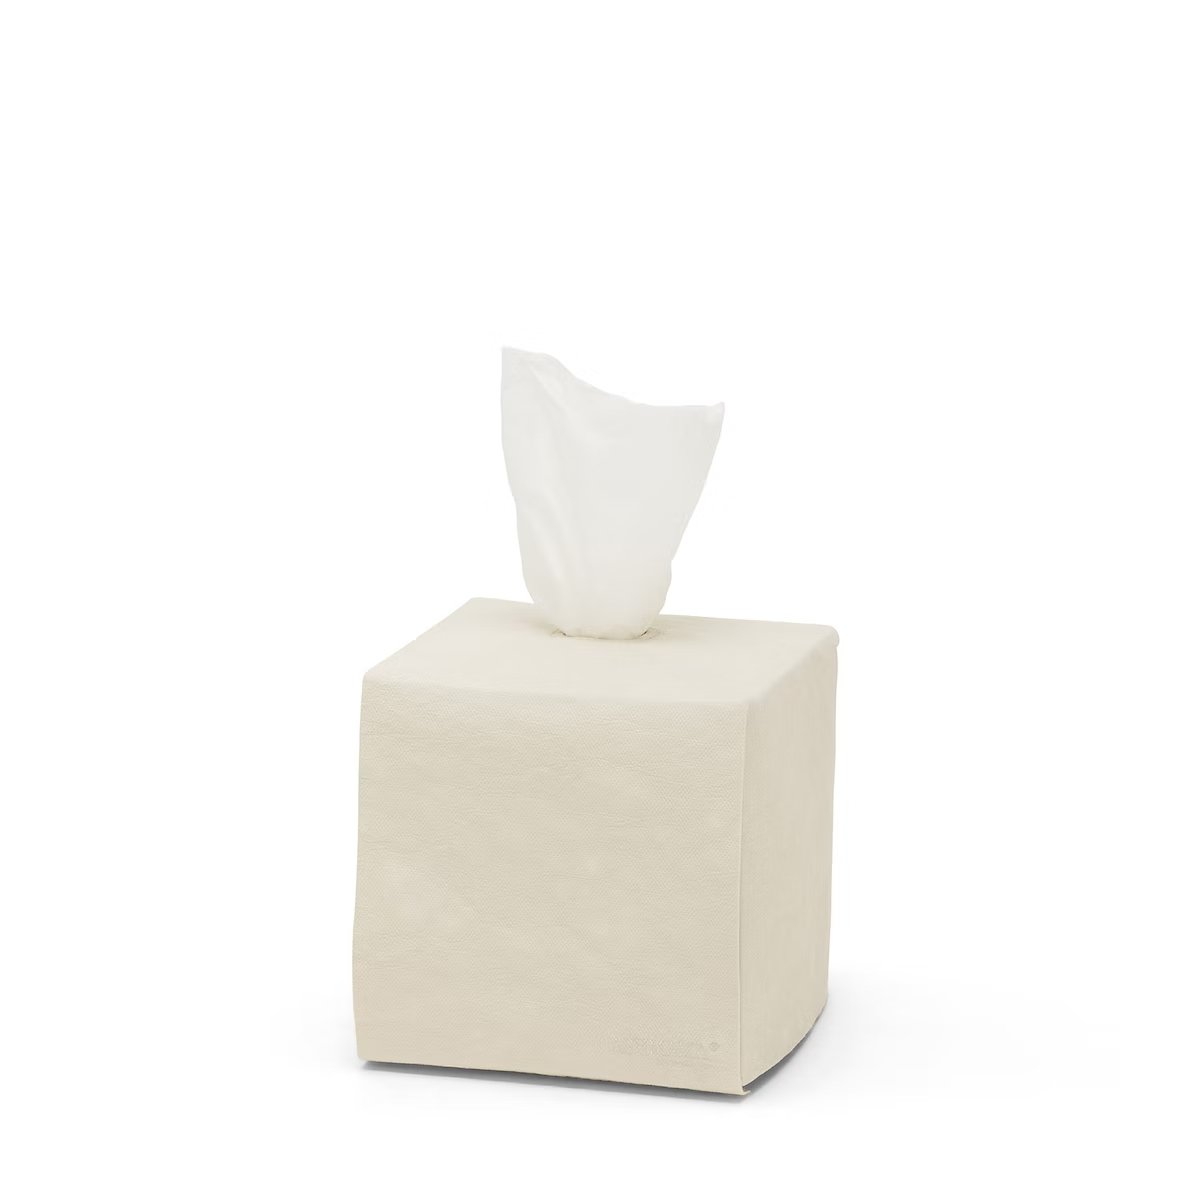 A square tissue box holder made of washable paper is shown, with a white tissue protruding from the top of the box. The UASHMAMA logo is printed in white lettering on the bottom right hand corner of the box. The tissue box cover is pale cream.